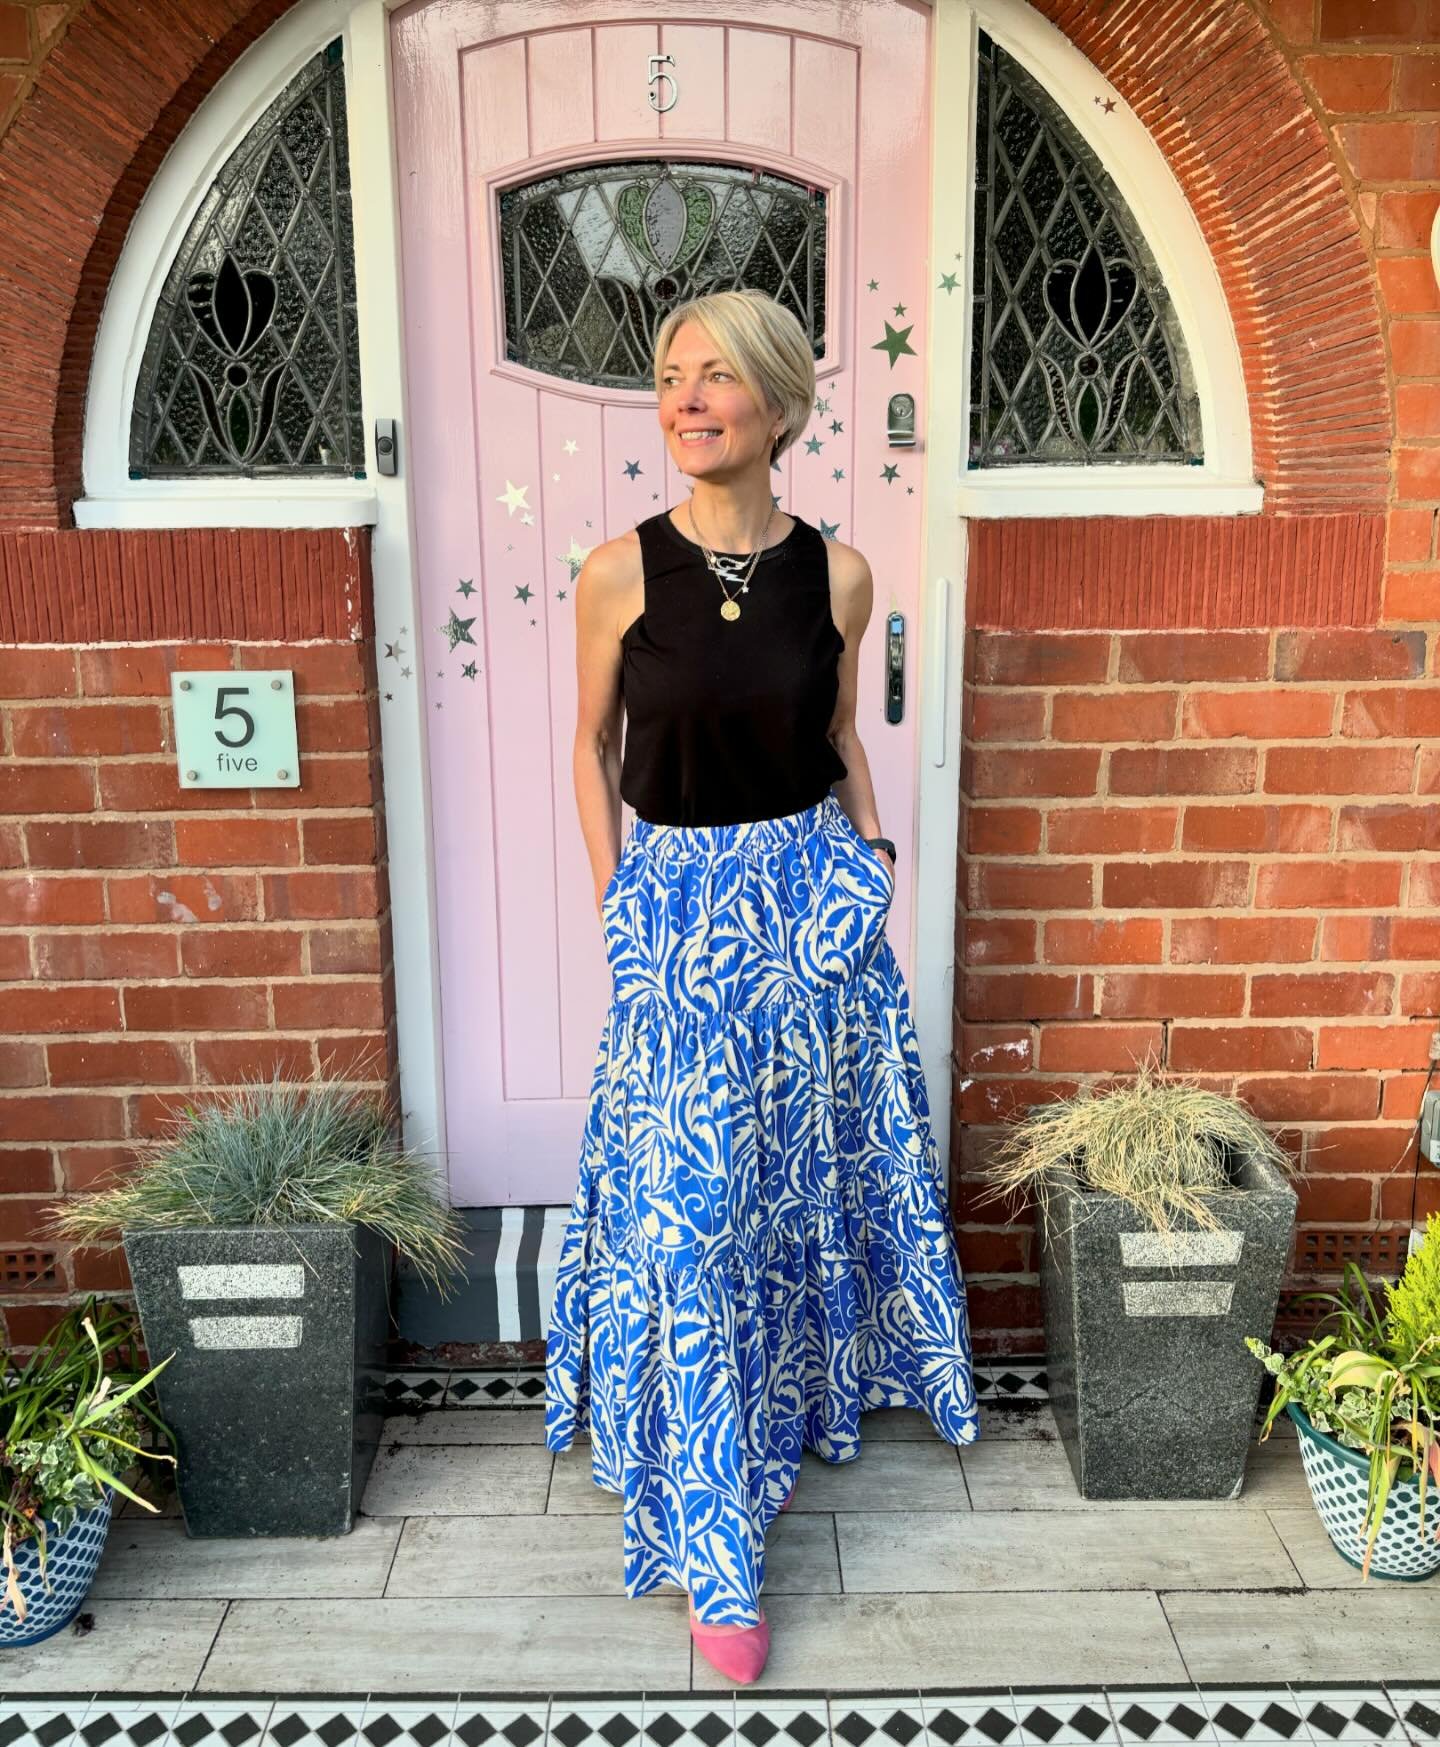 Making its appearance for about the 4th or 5th year in a row, the @zara skirt! It&rsquo;s great for when it&rsquo;s hot but my brain hasn&rsquo;t quite caught up with the idea of &ldquo;proper&rdquo; summer clothes! Hope you&rsquo;re enjoying the ray